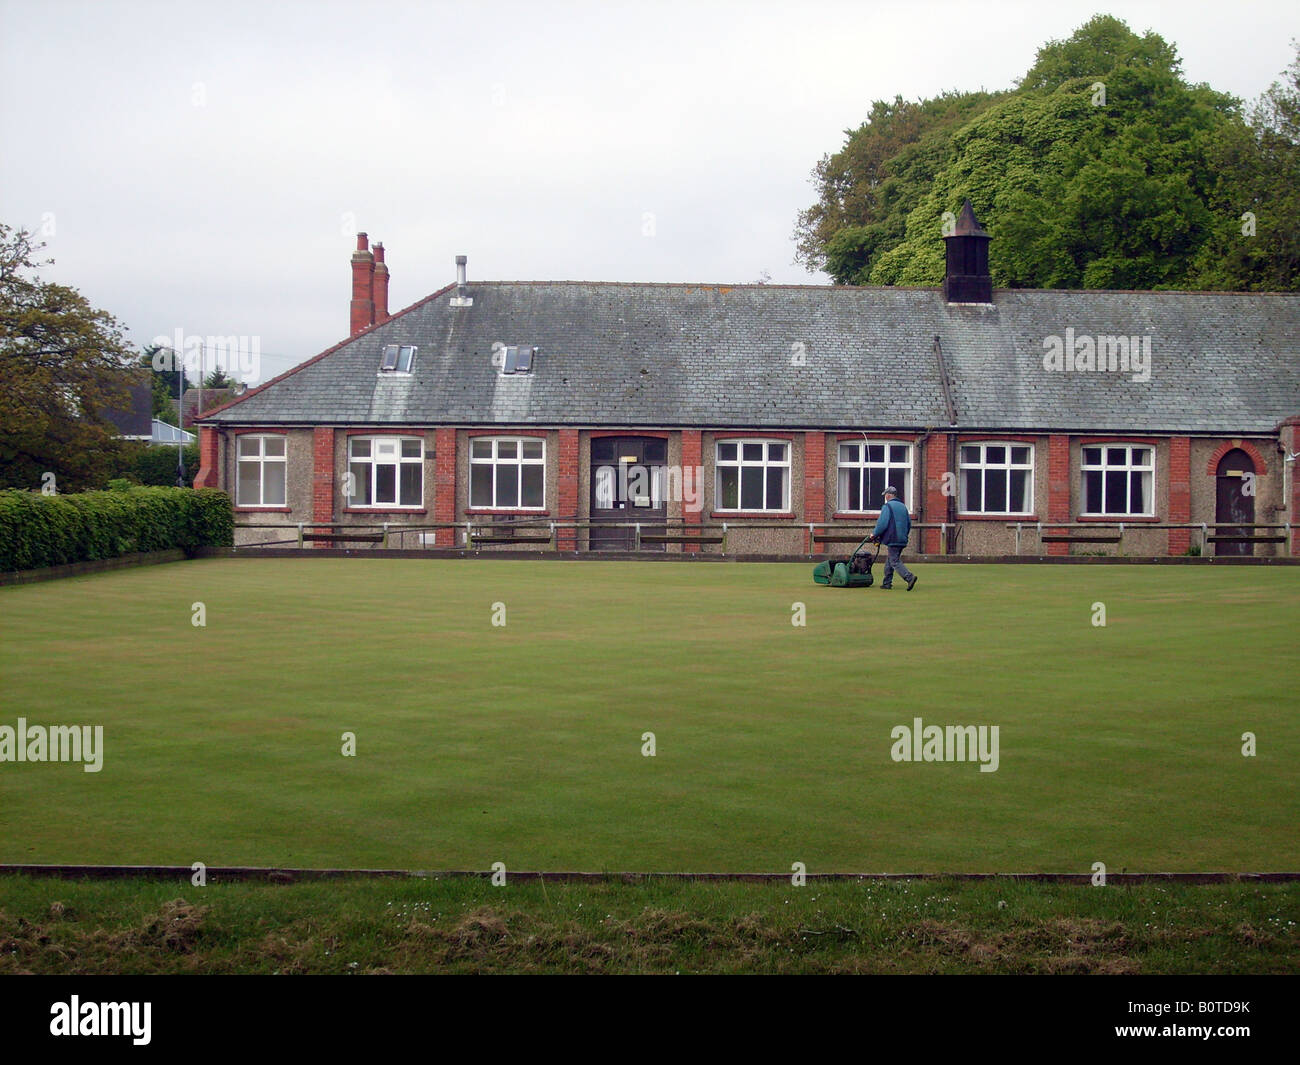 English bowling green pavilion, Scalby Village Scarborough, England. Being mowed by groundsman. Stock Photo